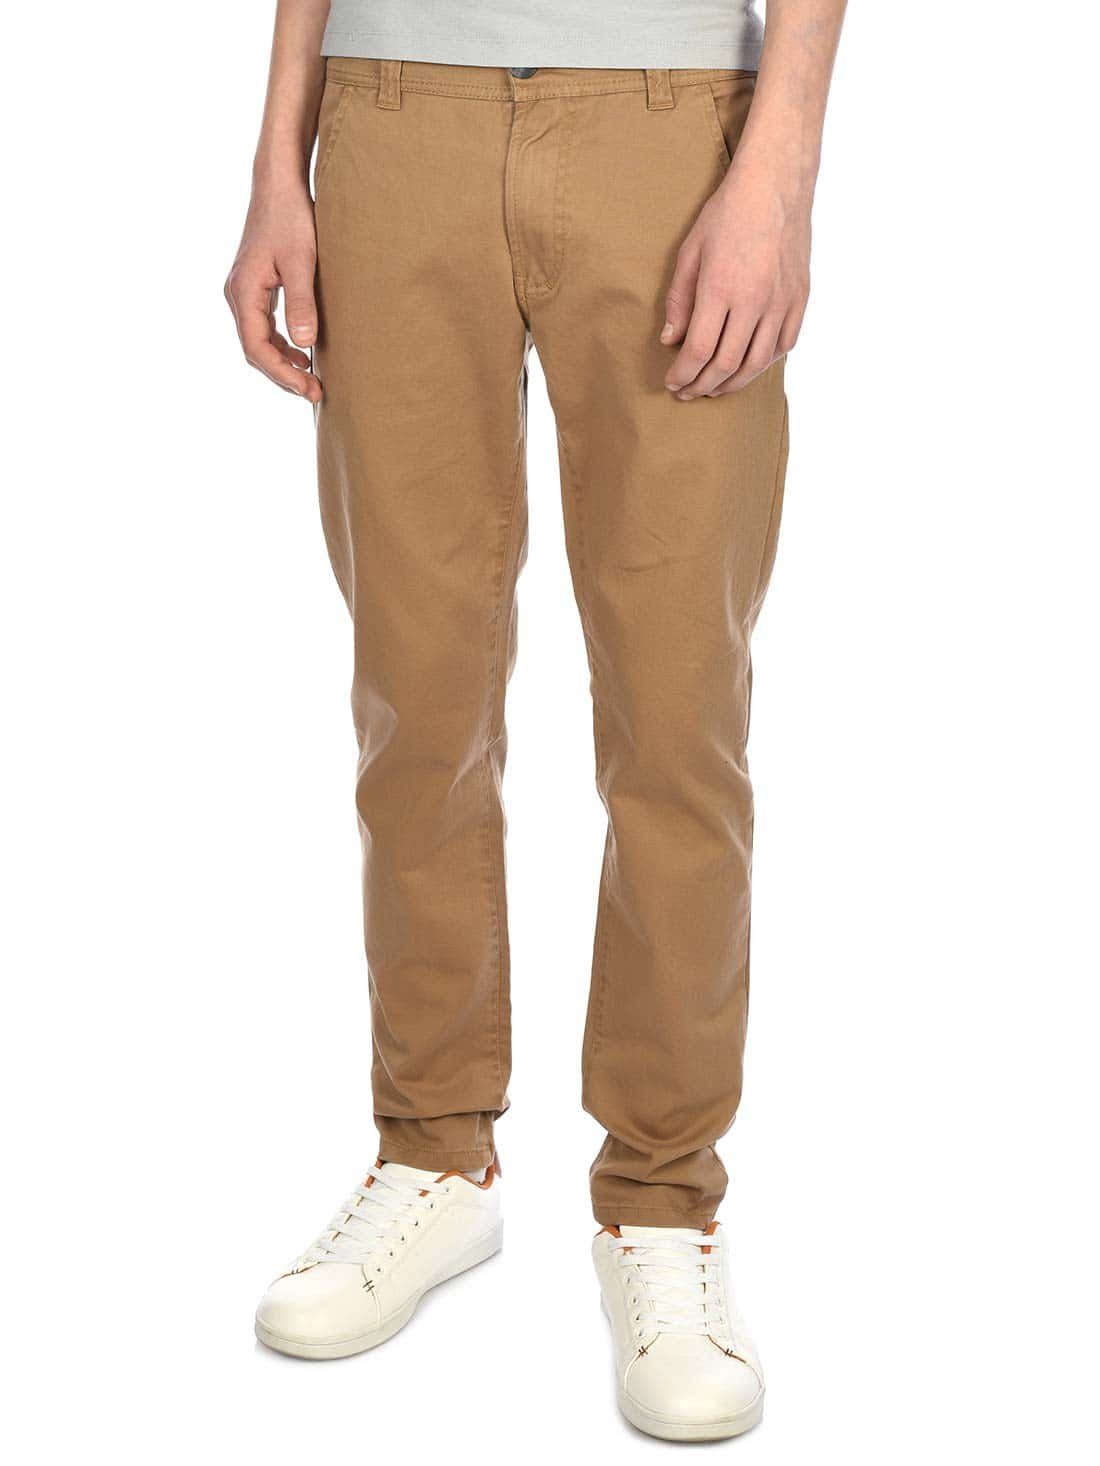 BEZLIT Chinohose Jungen Chino Hose casual (1-tlg) Beige